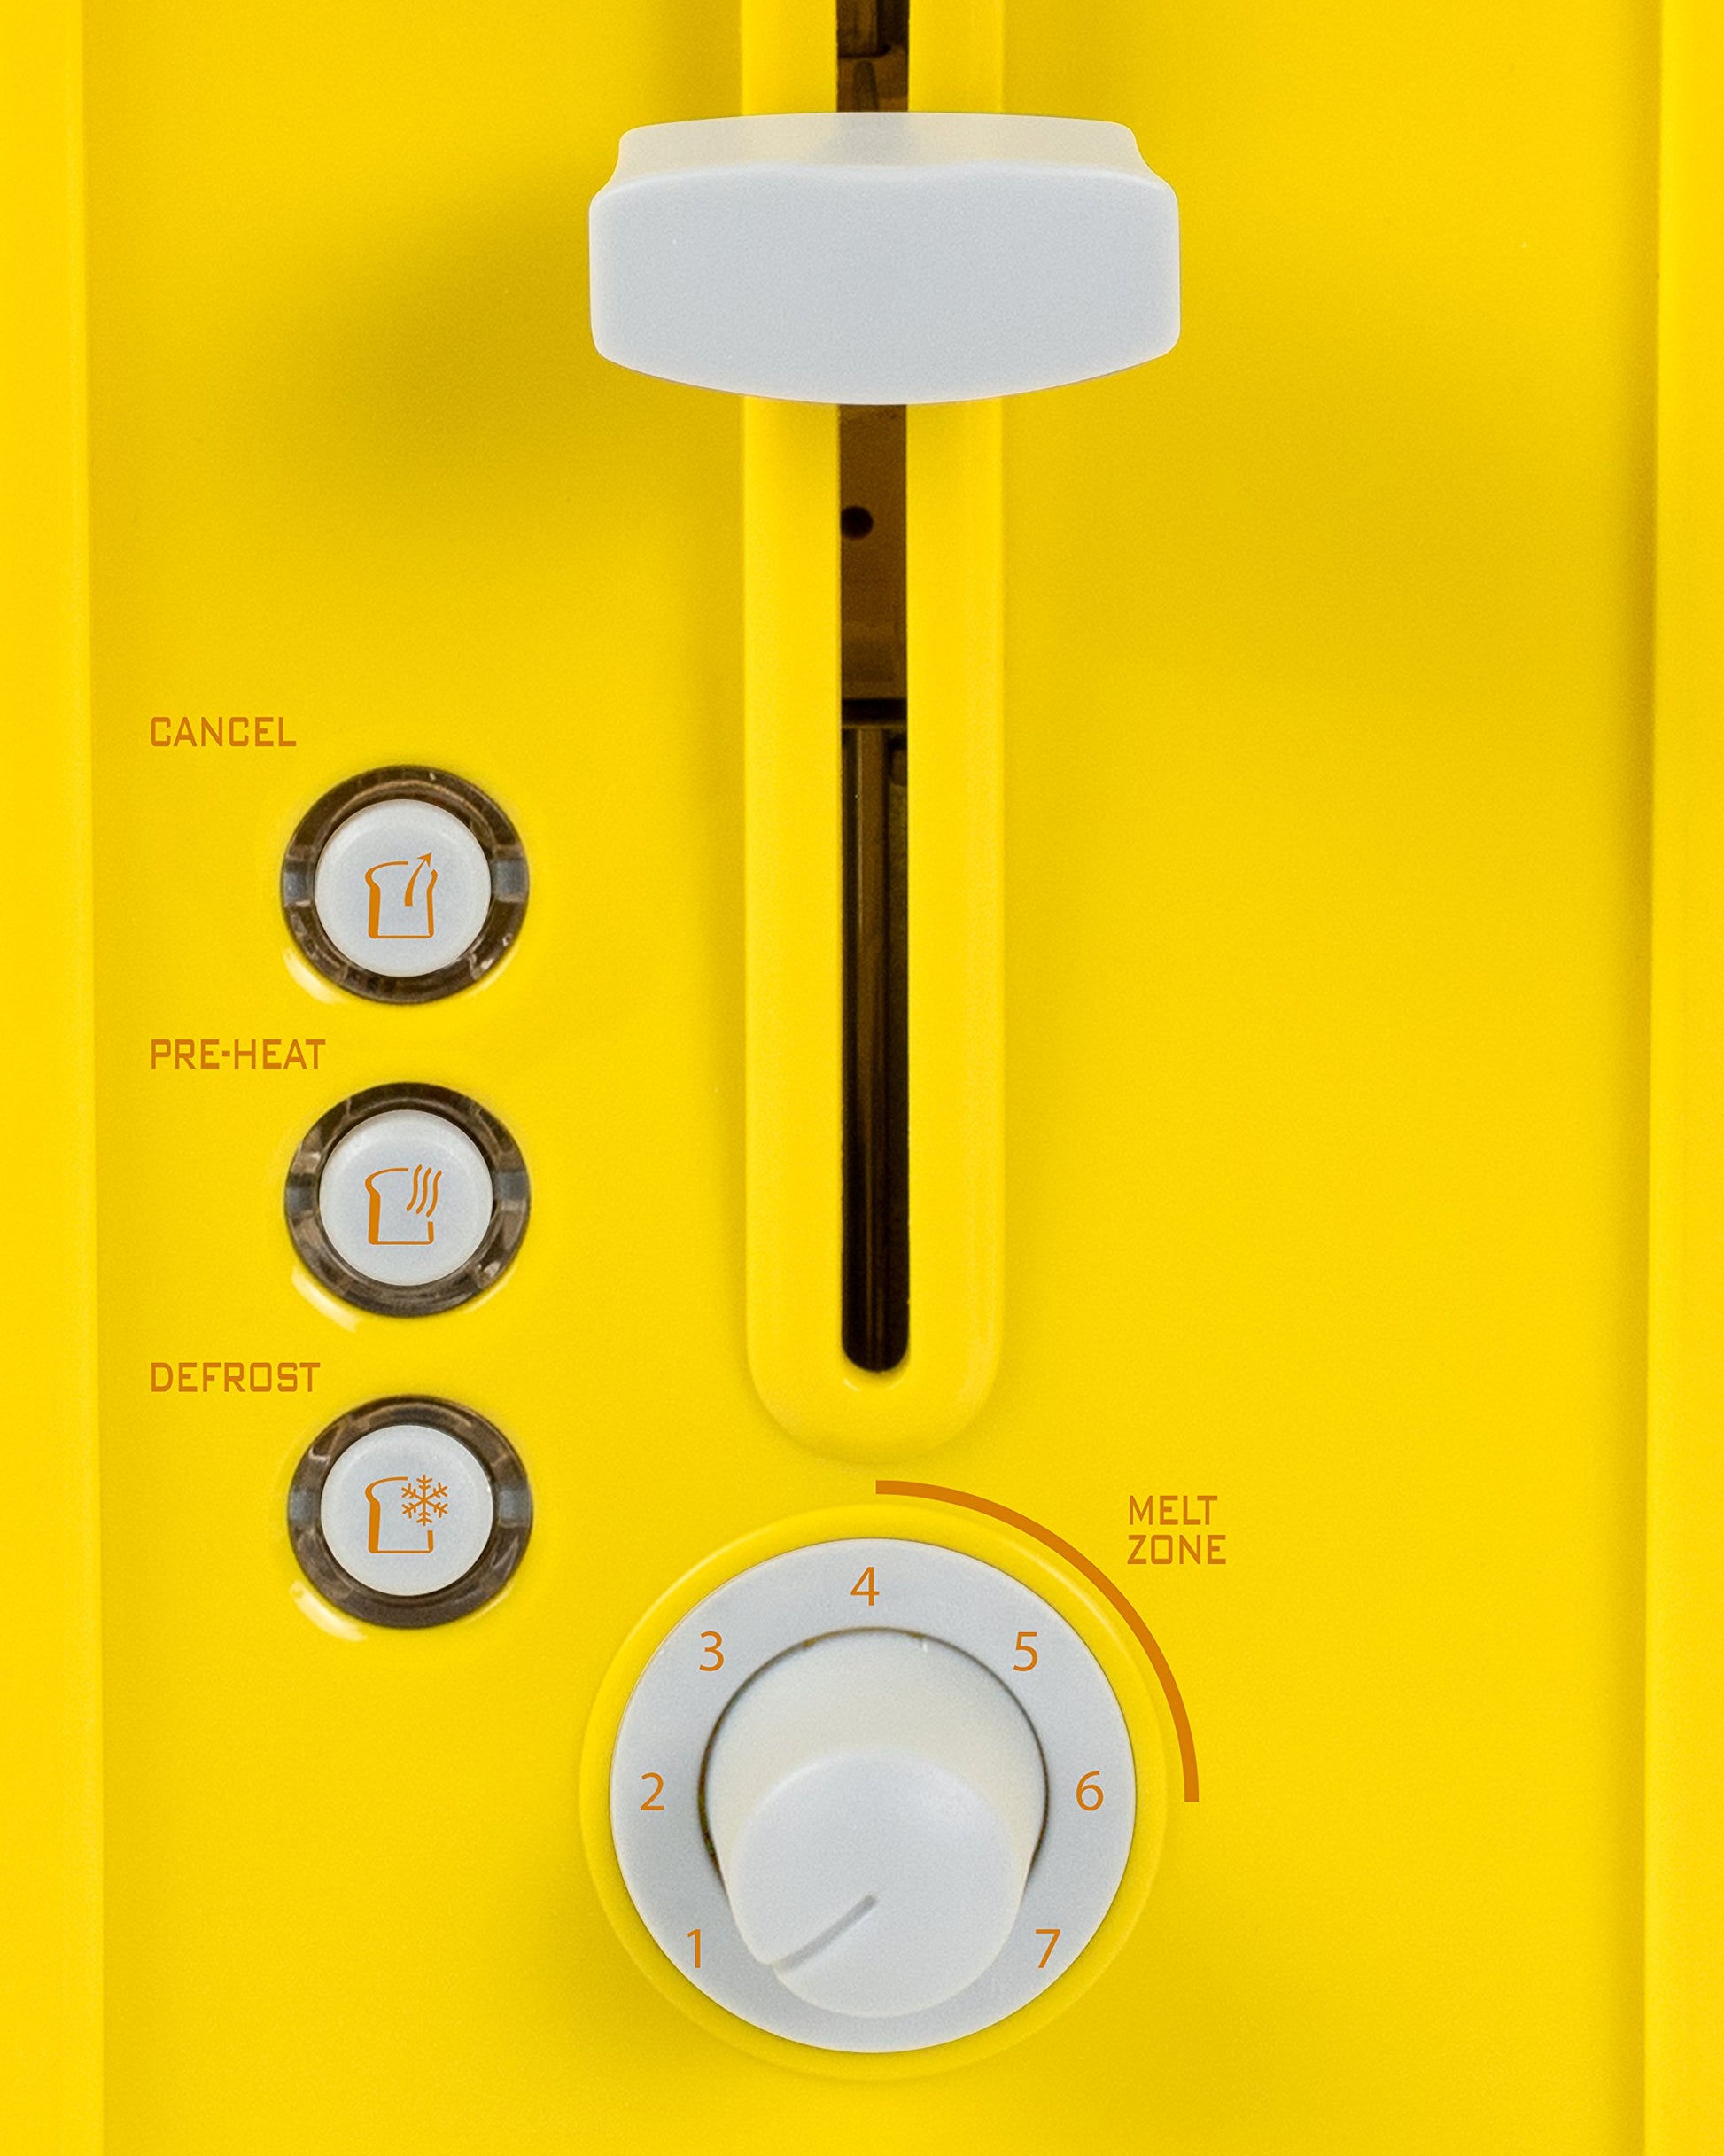 Close-up view of the control panel on the grilled cheese sandwich toaster